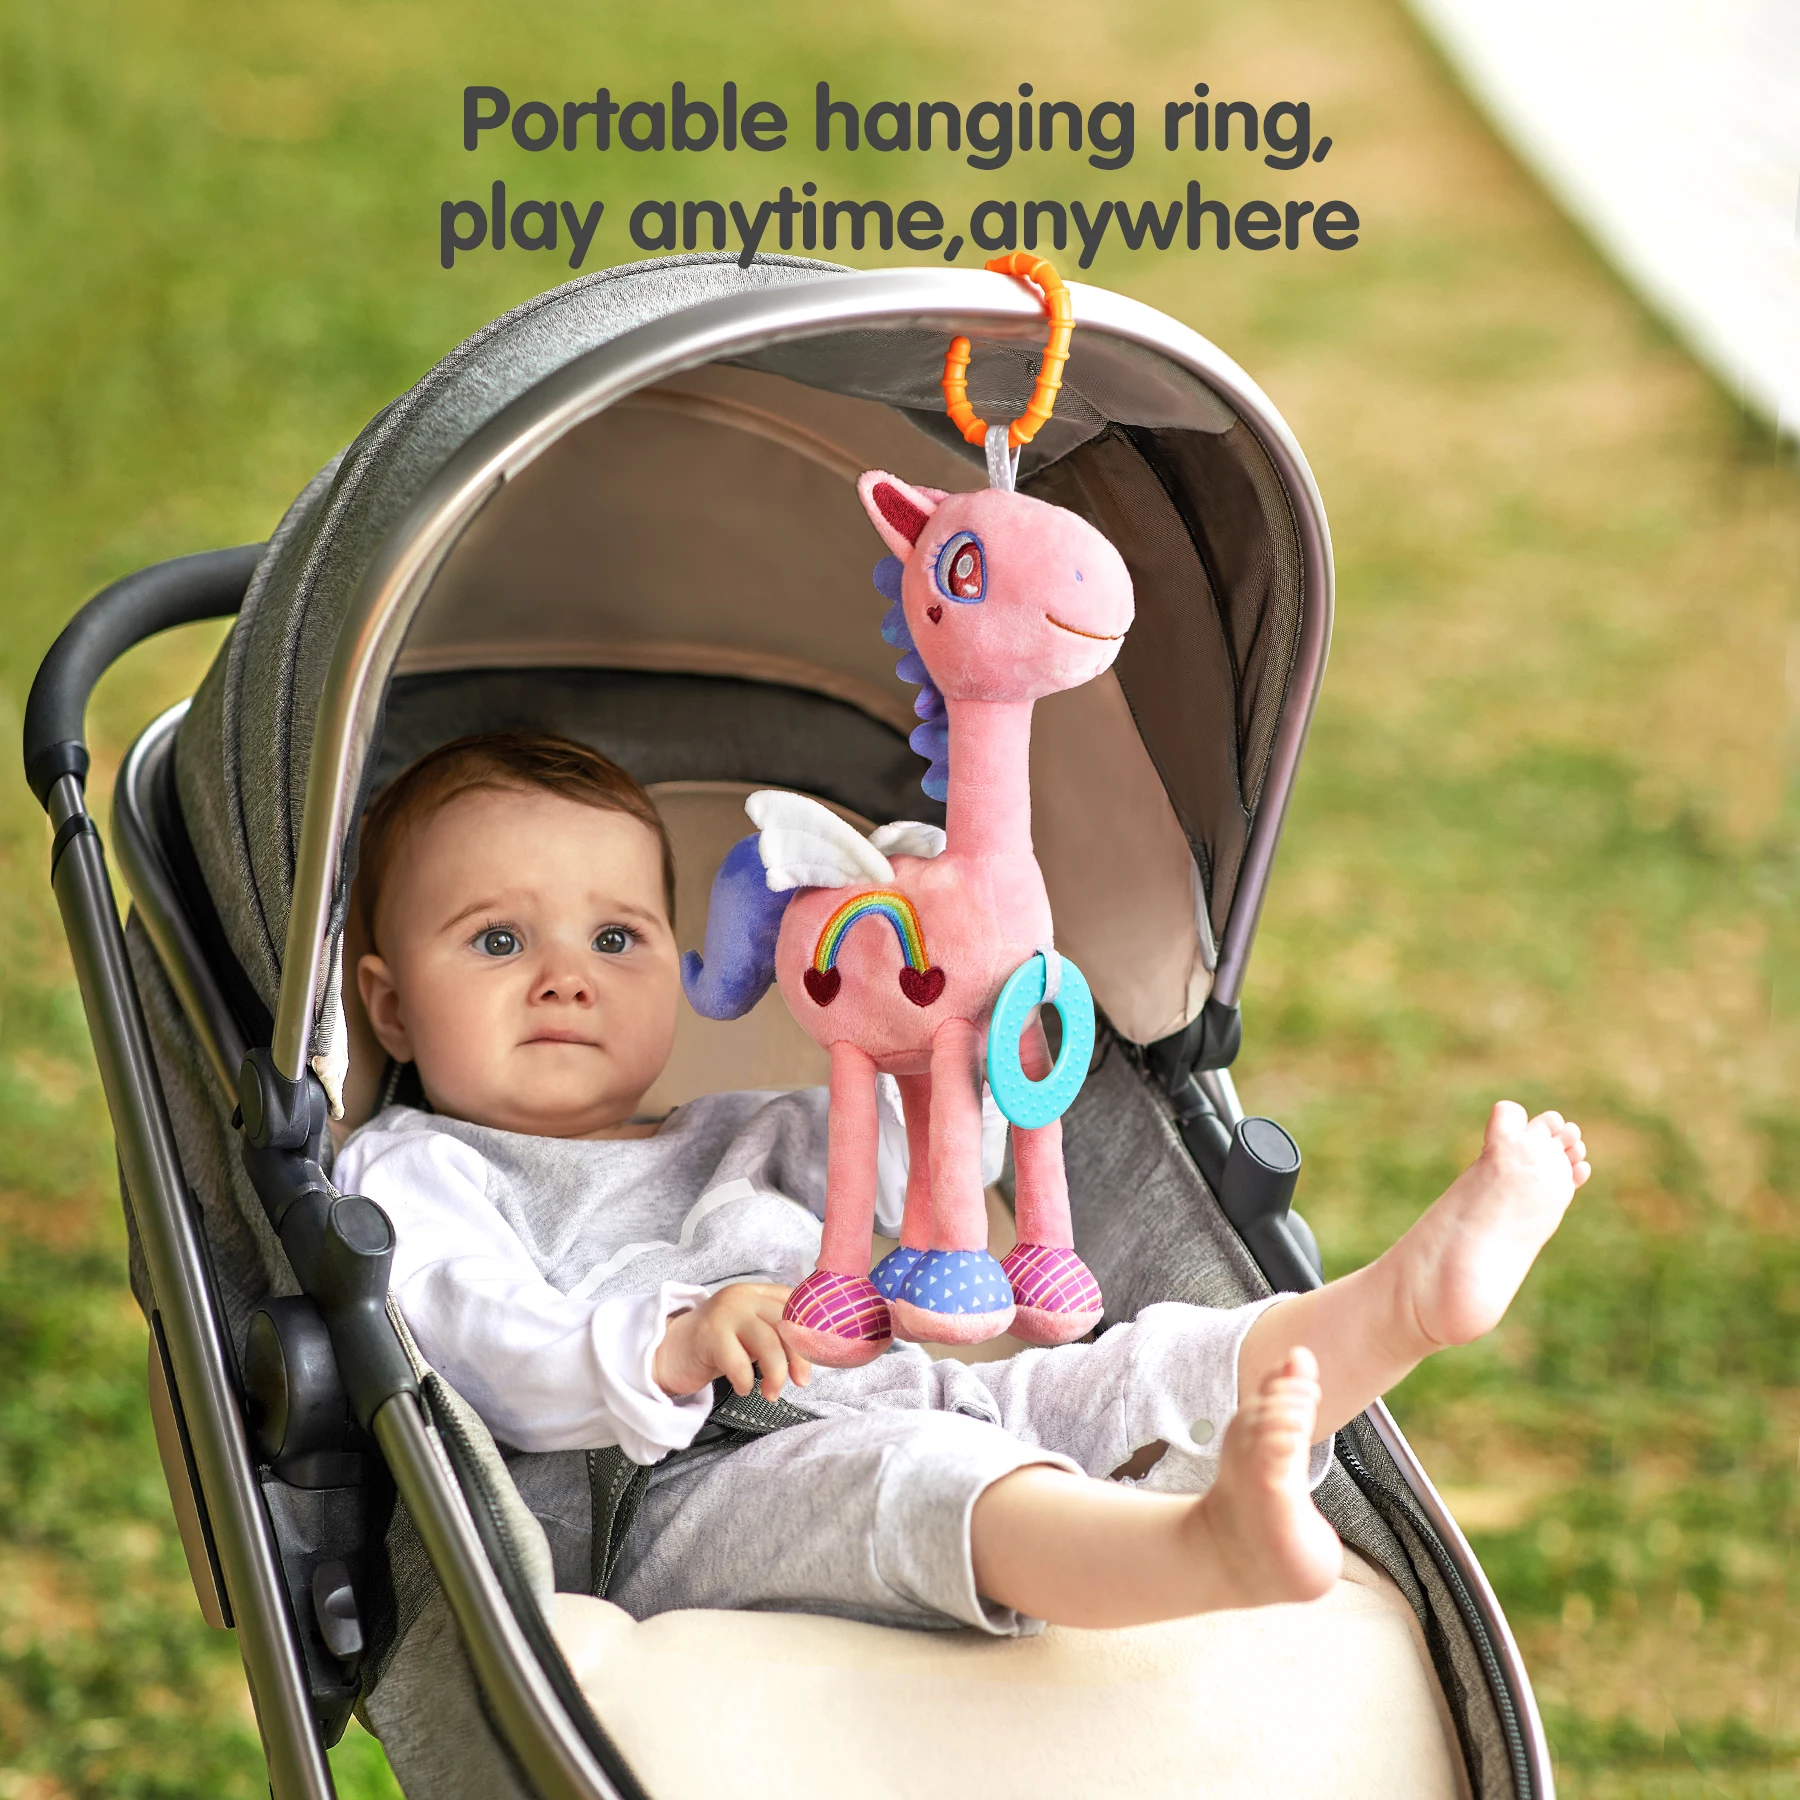 Tumama Kids Pink Unicorn Soft Hanging Rattle Toy Build-in Bell Plush Crib Toys Car Seat Baby Stroller Hanging Toy for Infants